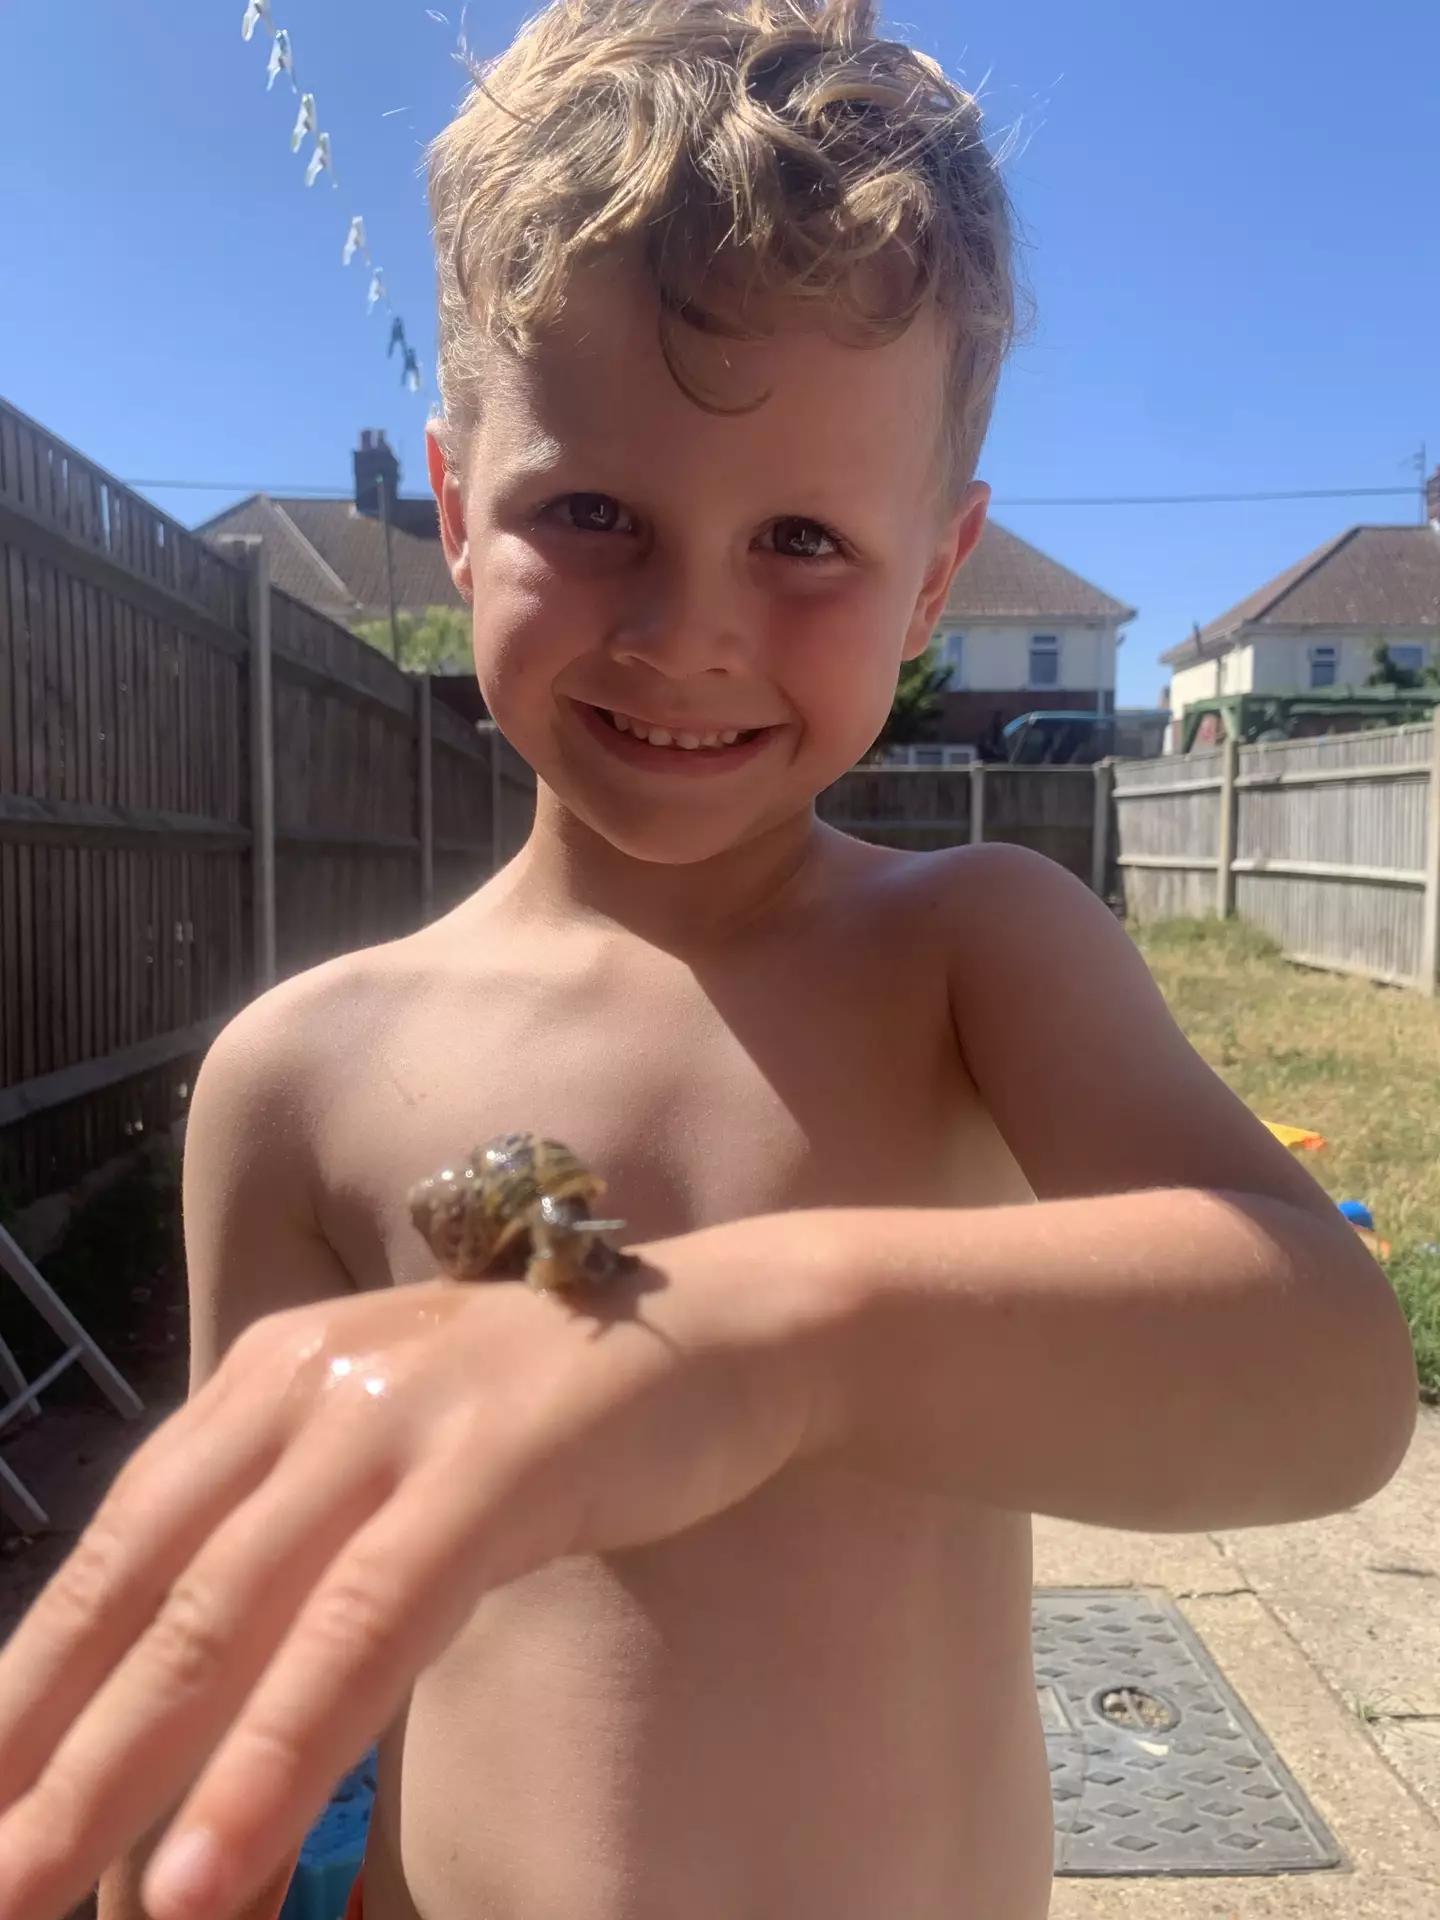 Five-year-old Rye is a big animal lover and snails are no exception.